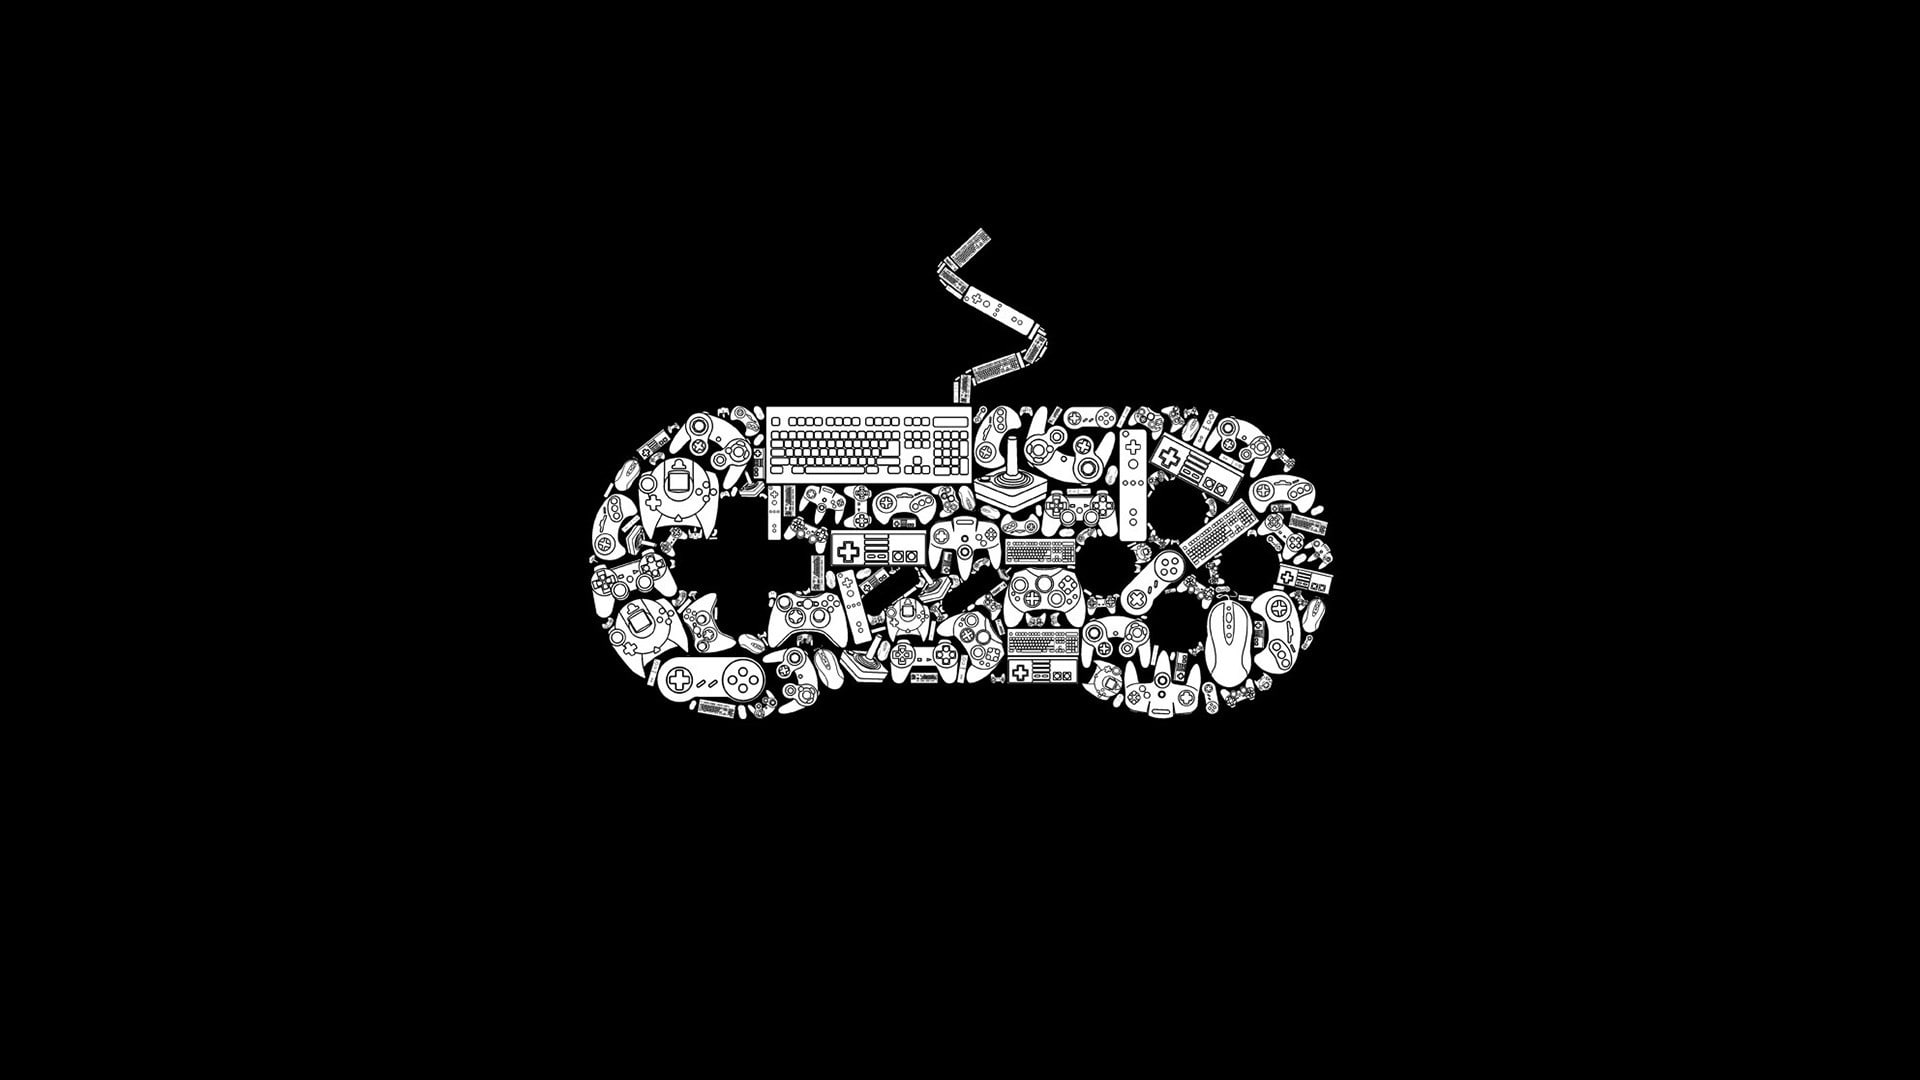 Controllers, Nintendo, Consoles, Keyboards, Computer Mice, Mixing Consoles, PlayStation, Xbox, Wii, corded game pad game controller doodle